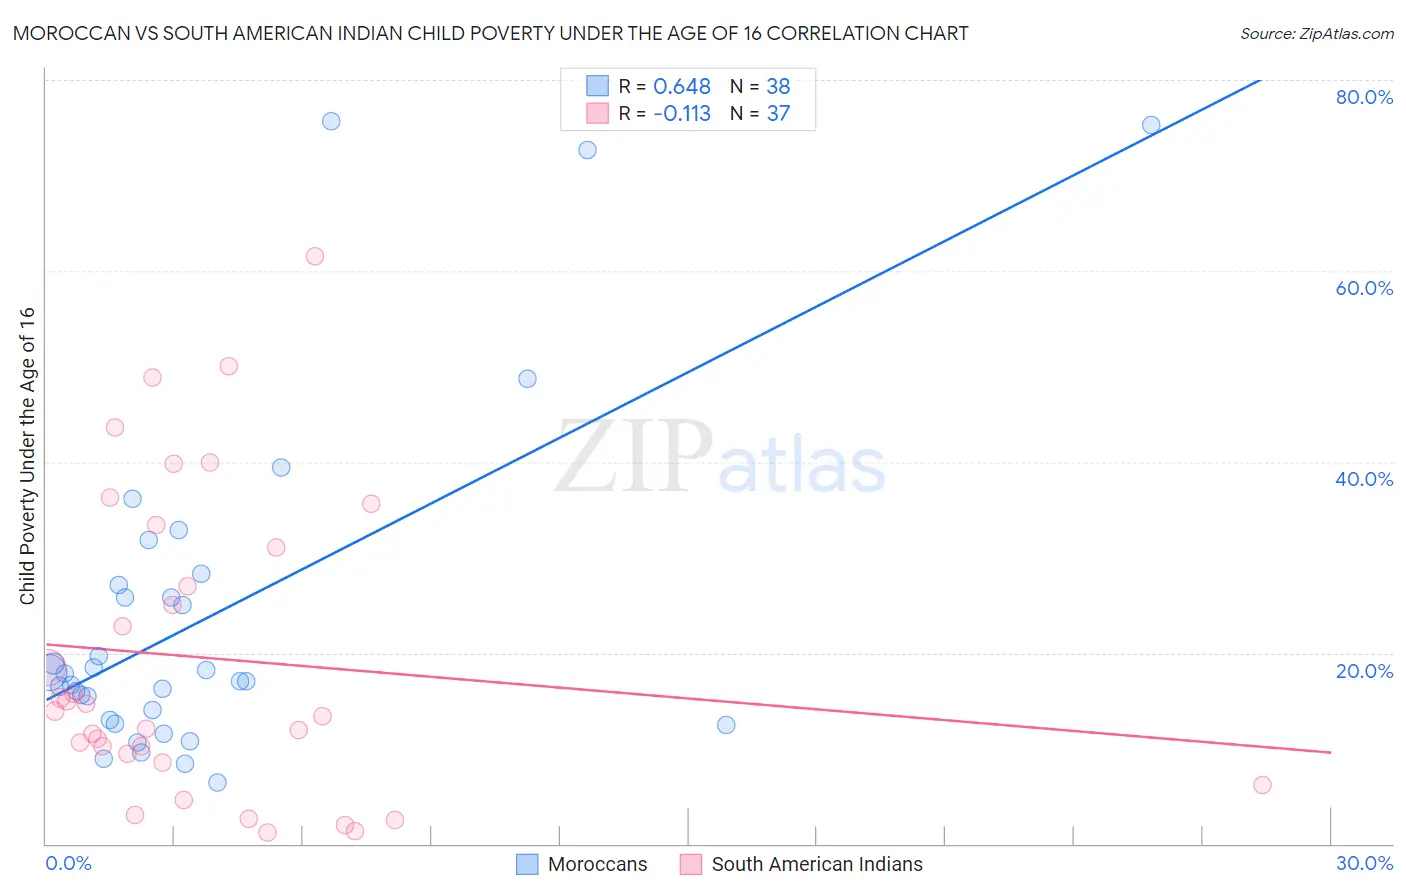 Moroccan vs South American Indian Child Poverty Under the Age of 16